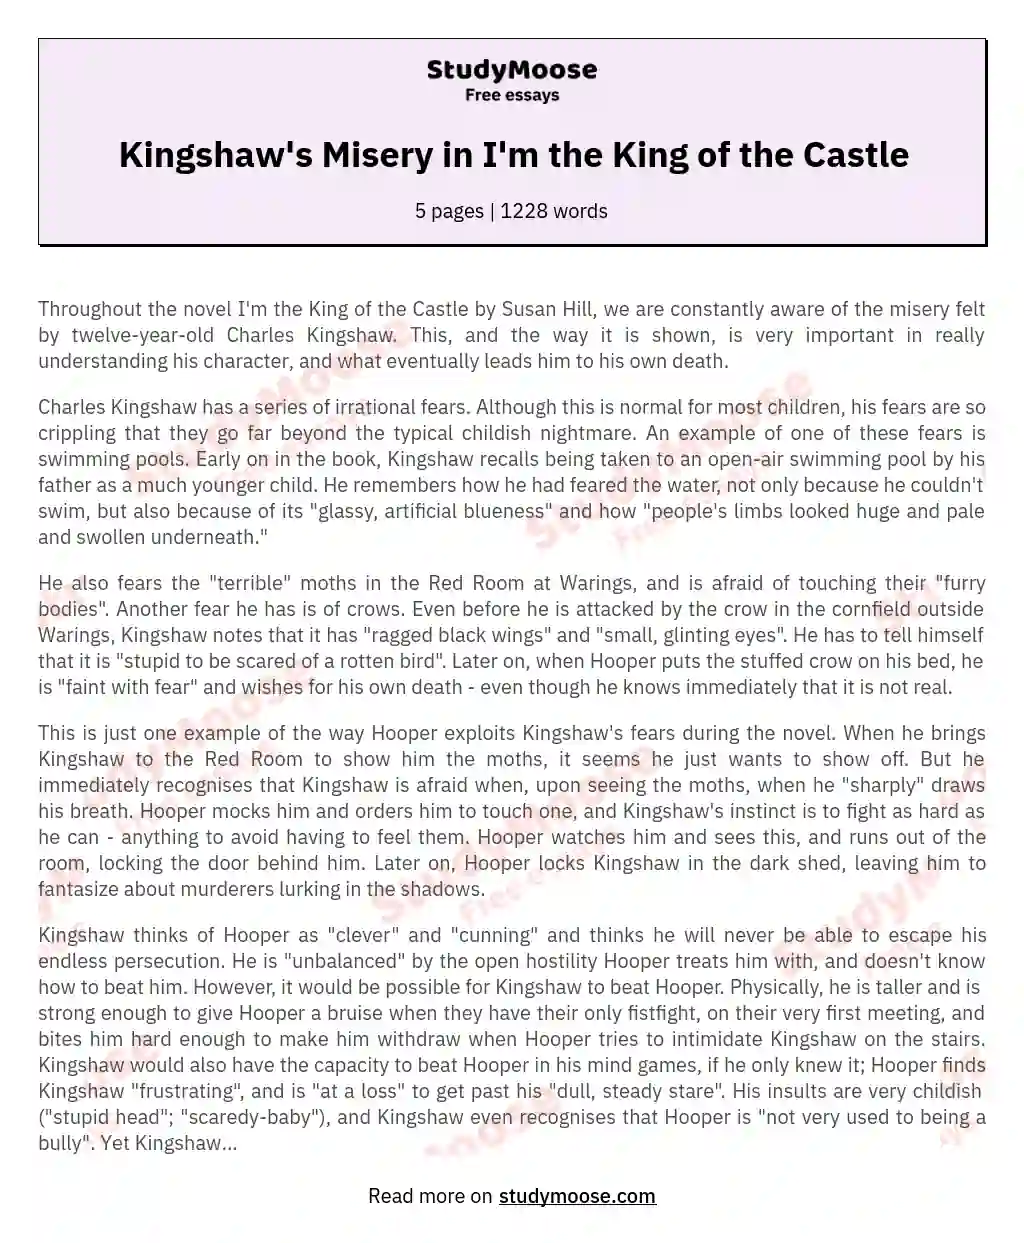 Kingshaw's Misery in I'm the King of the Castle essay